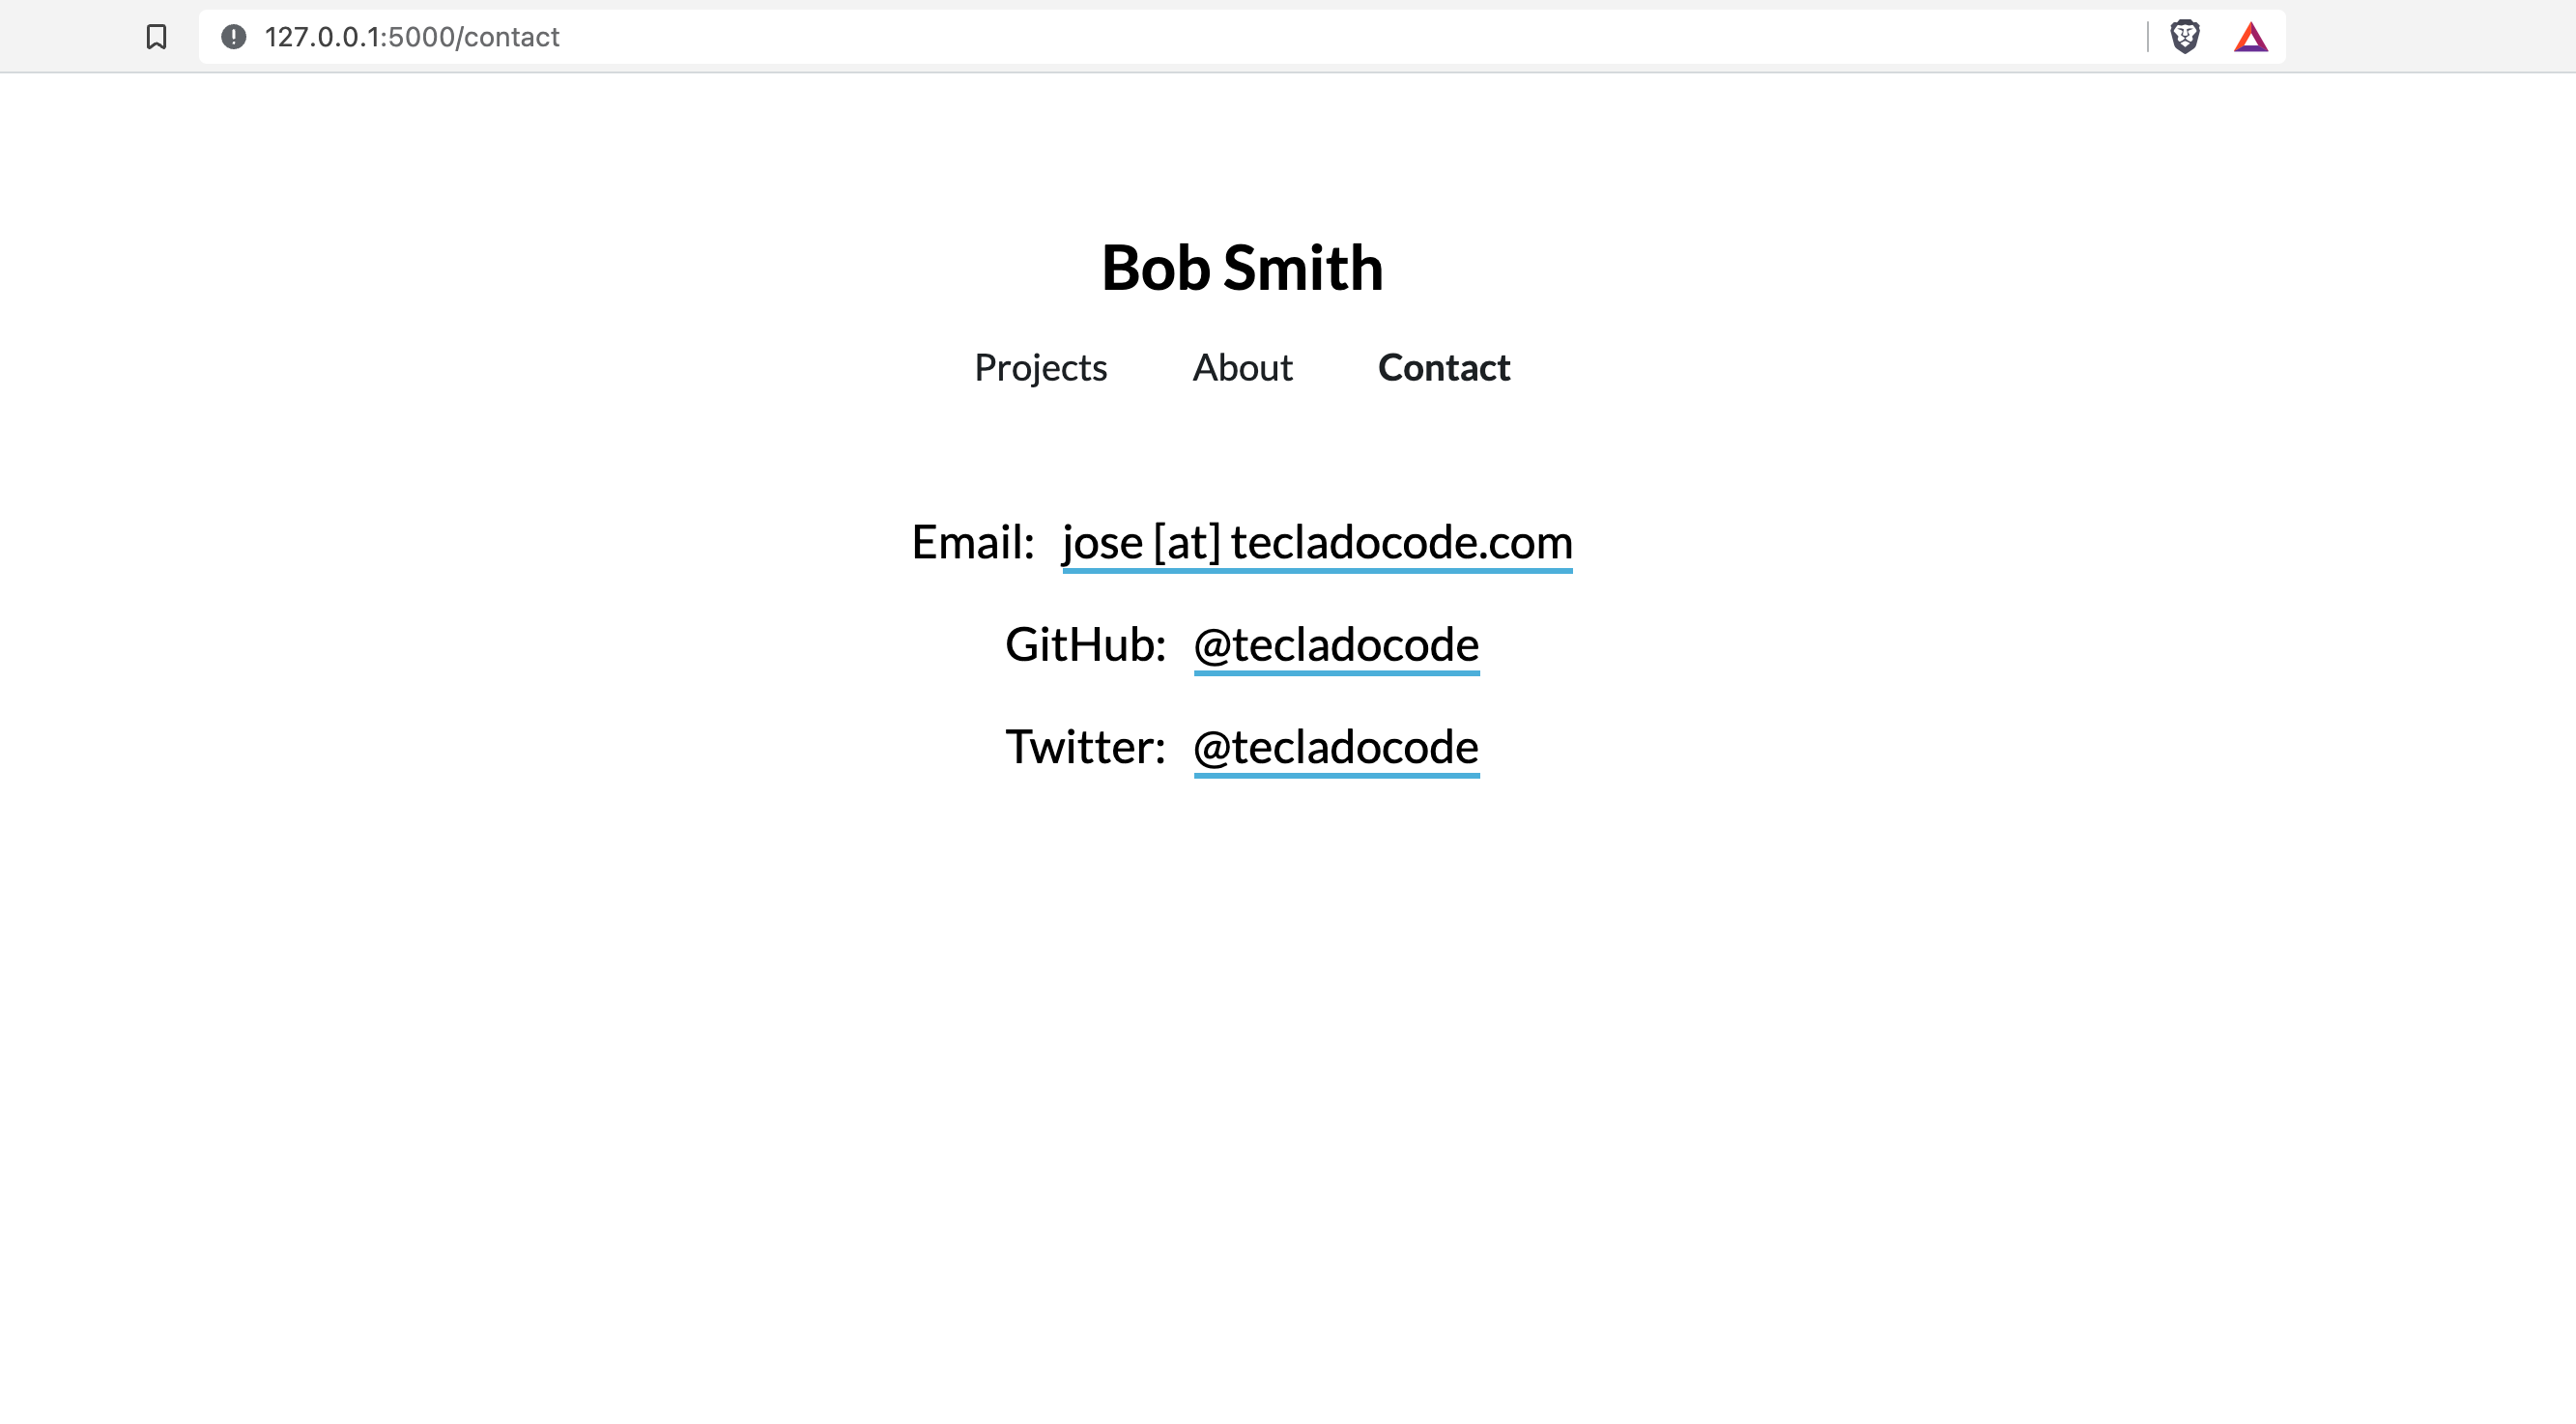 The profile page, showing the creator's contact details